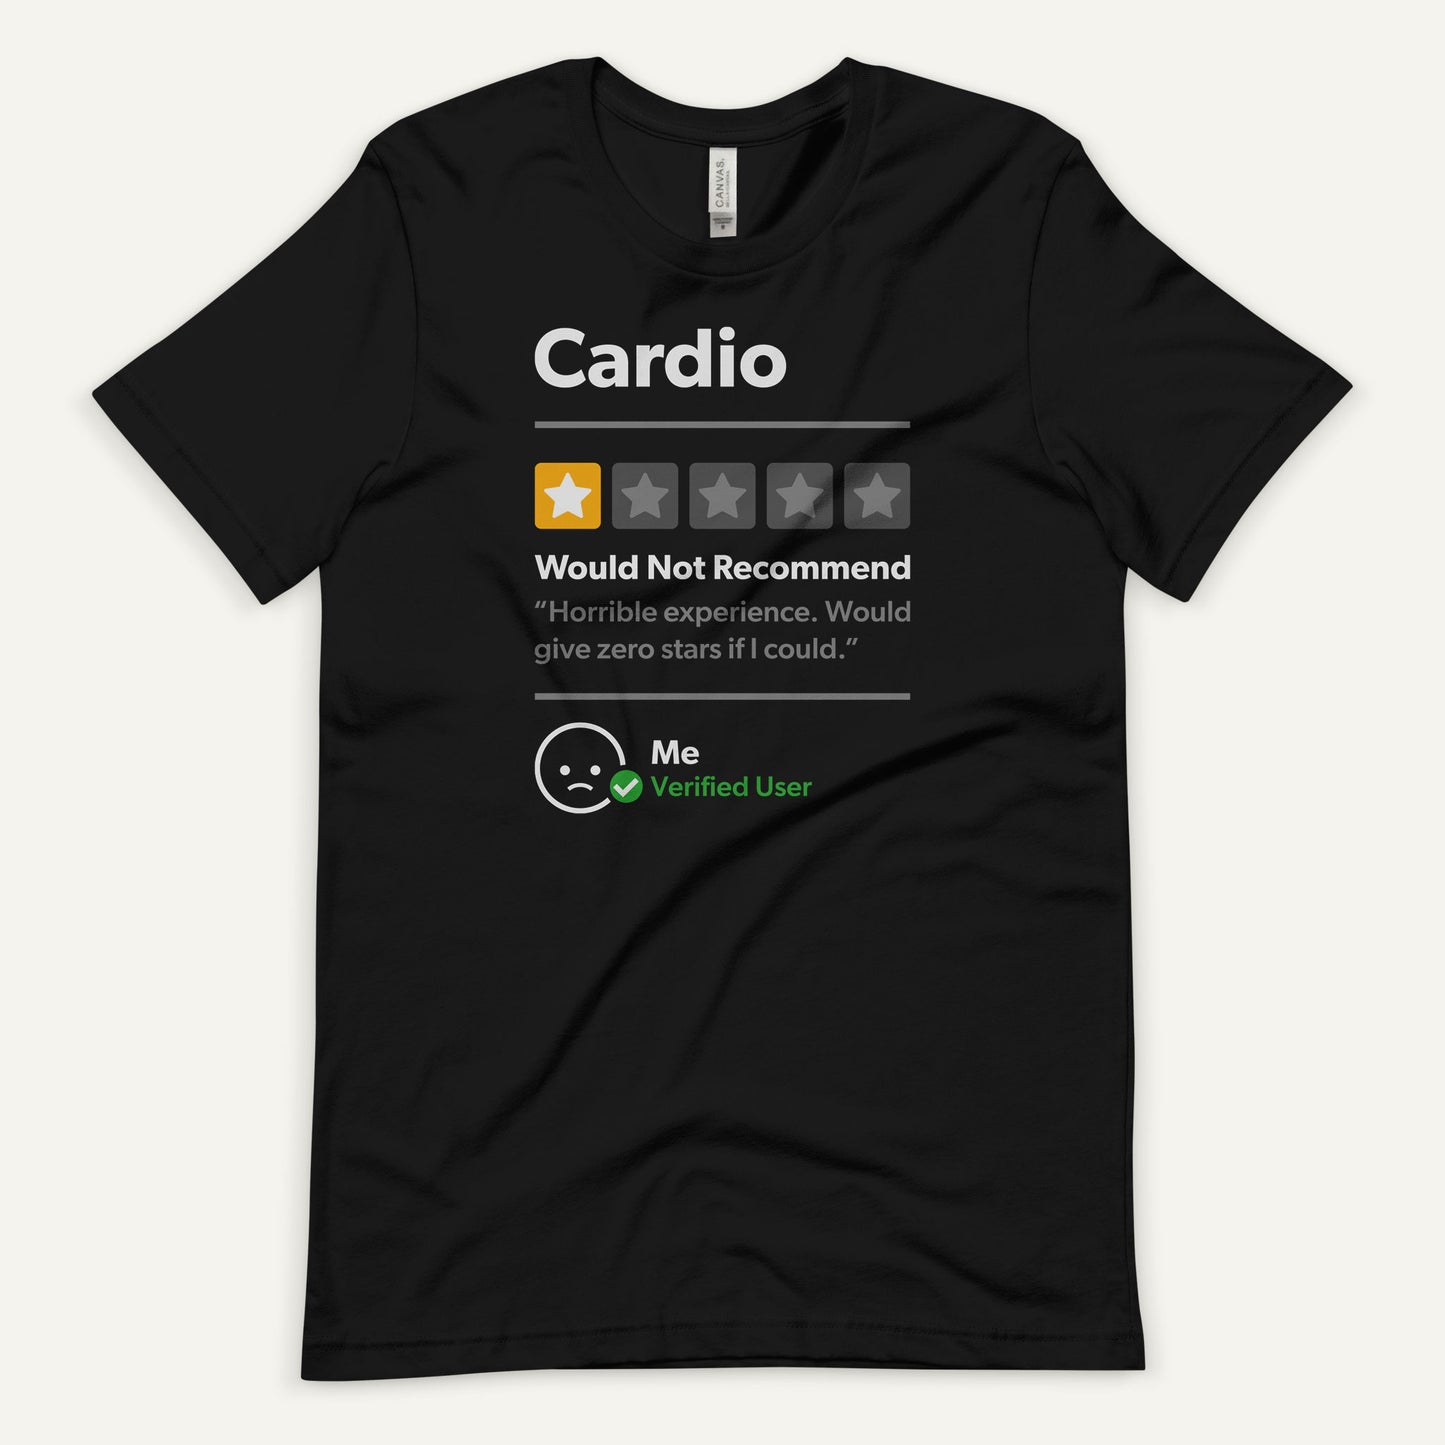 Cardio 1 Star Would Not Recommend Men's Standard T-Shirt